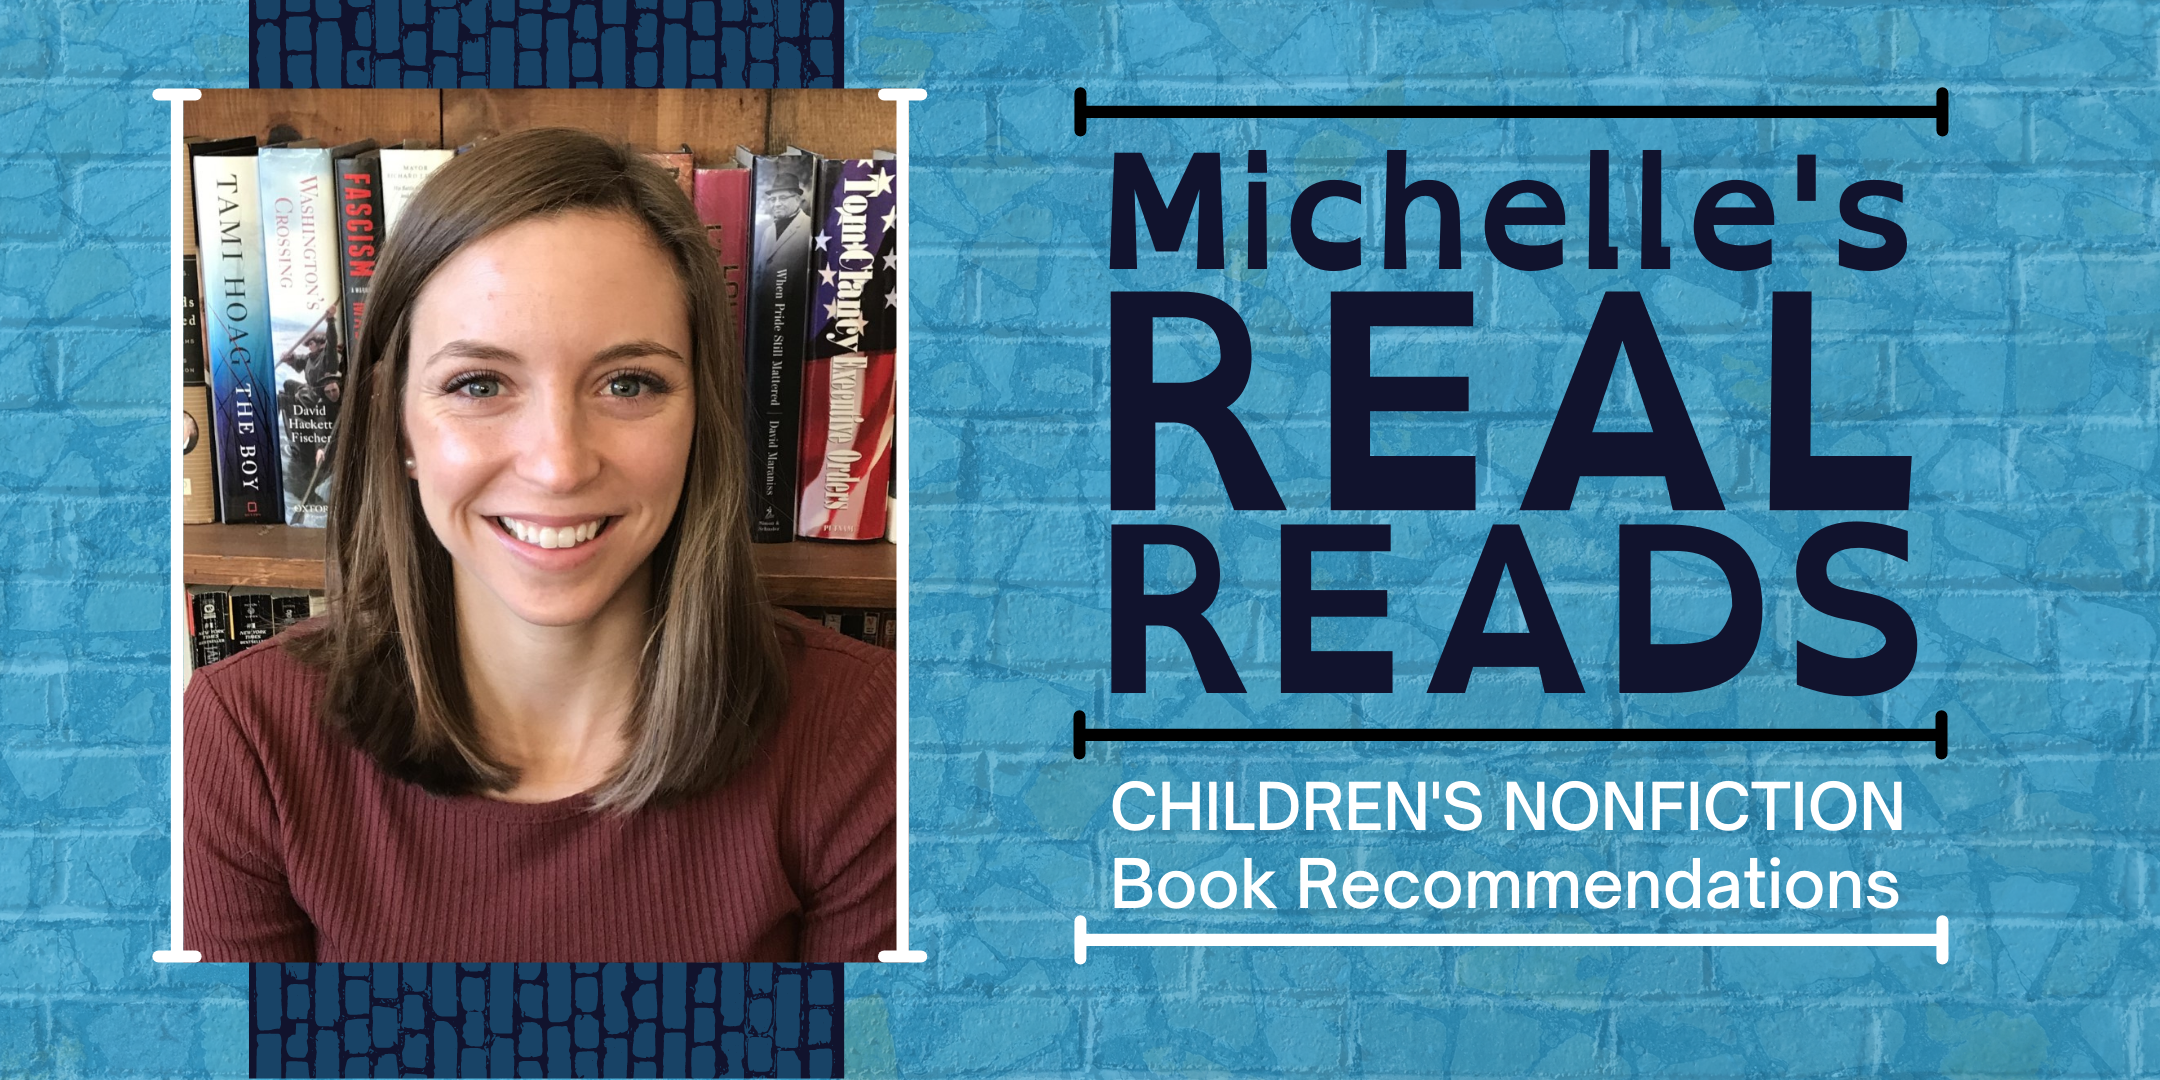 Michelle's Real Reads: Children's Nonfiction Book Recommendations